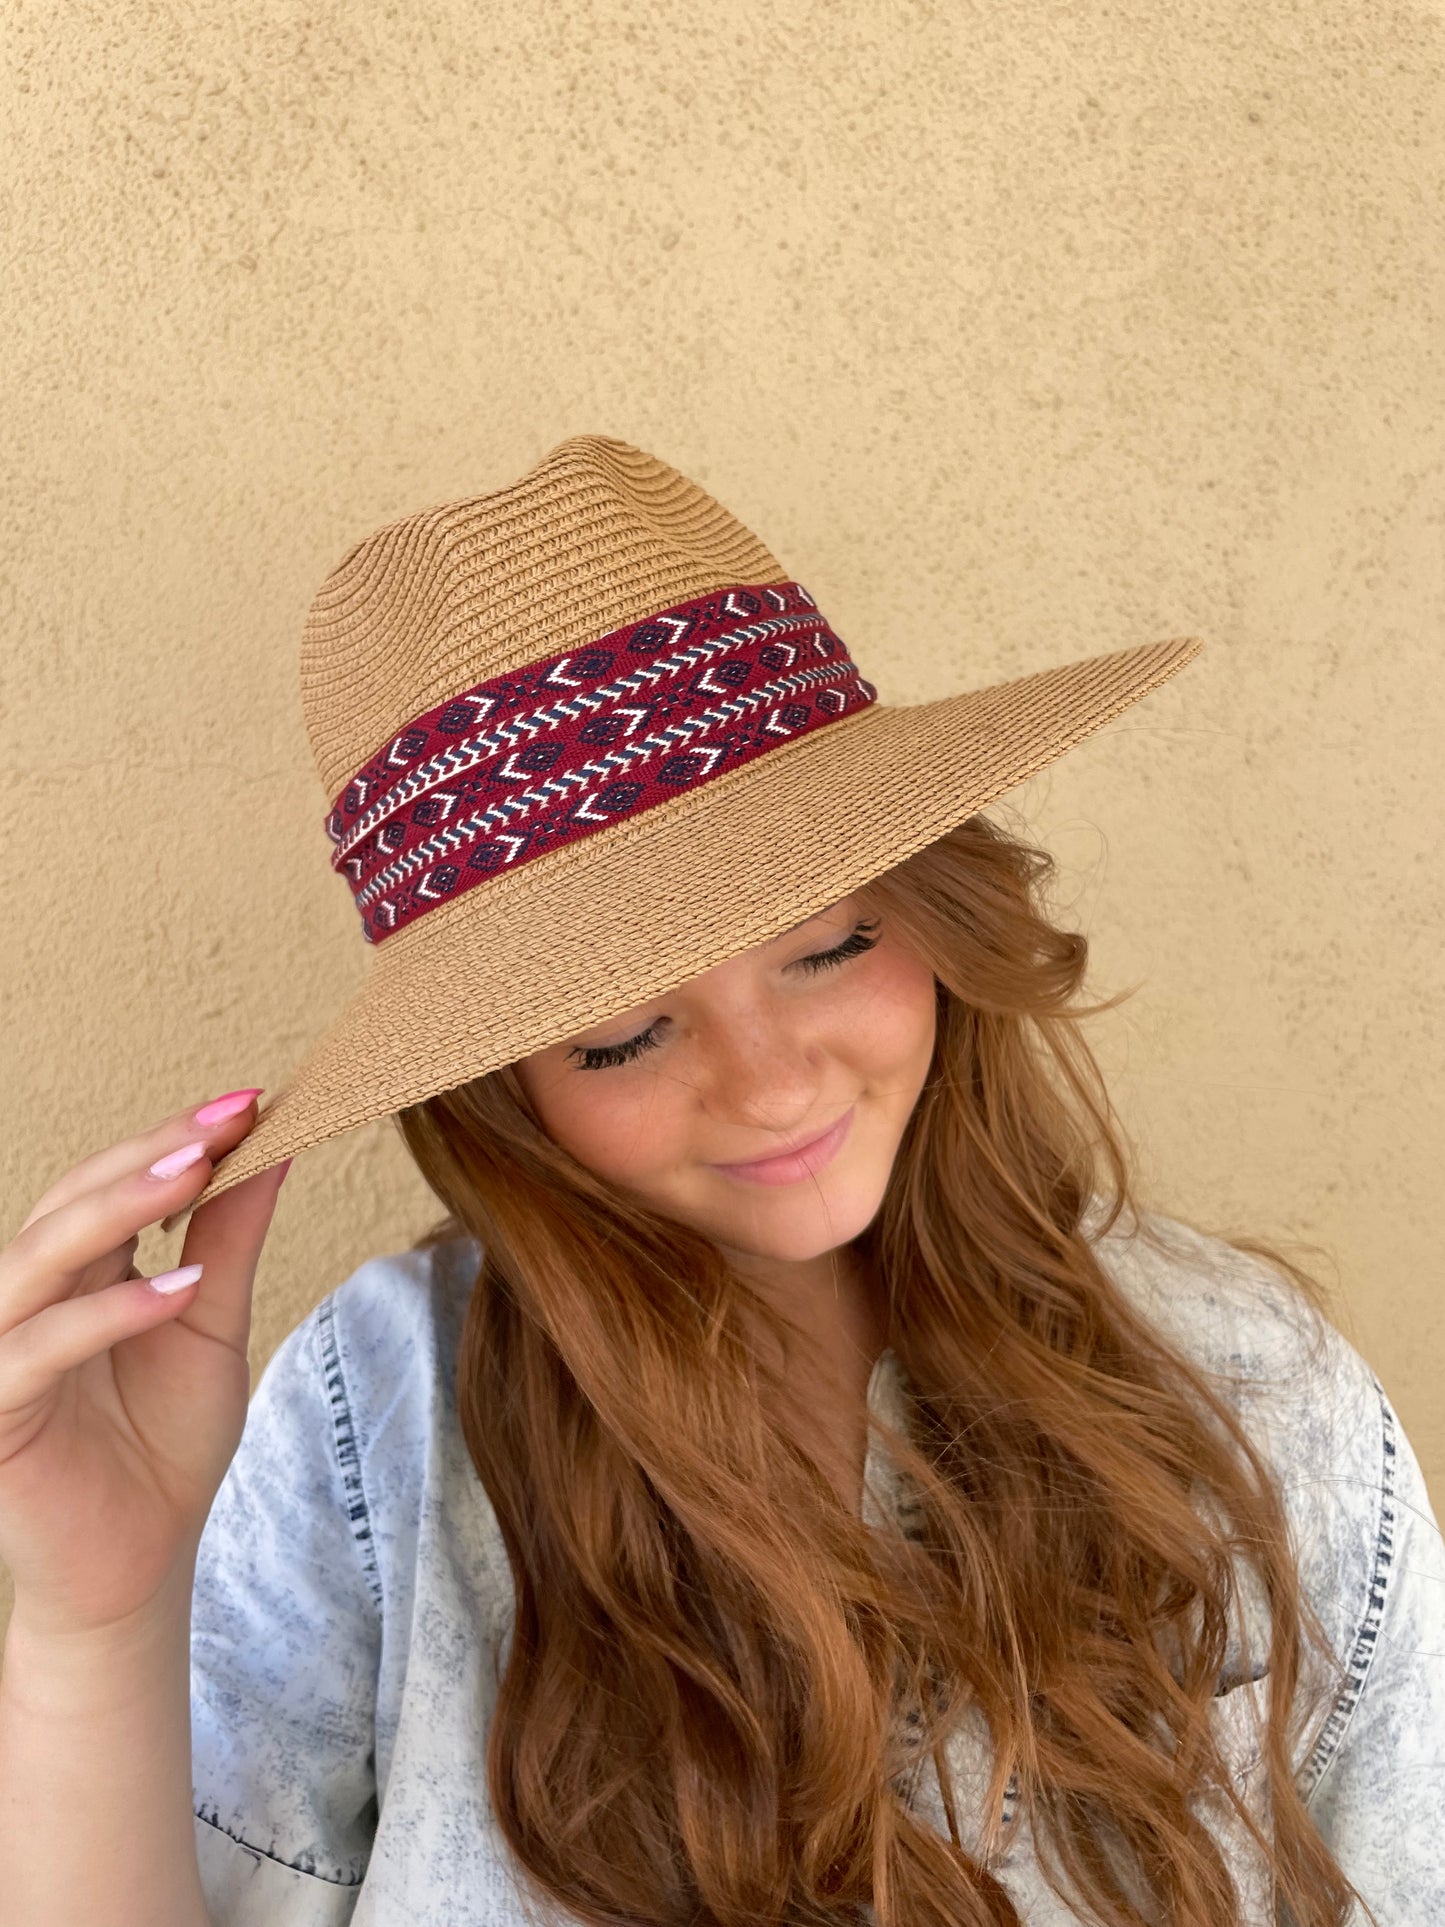 The Burgundy Rancher Woven Hat